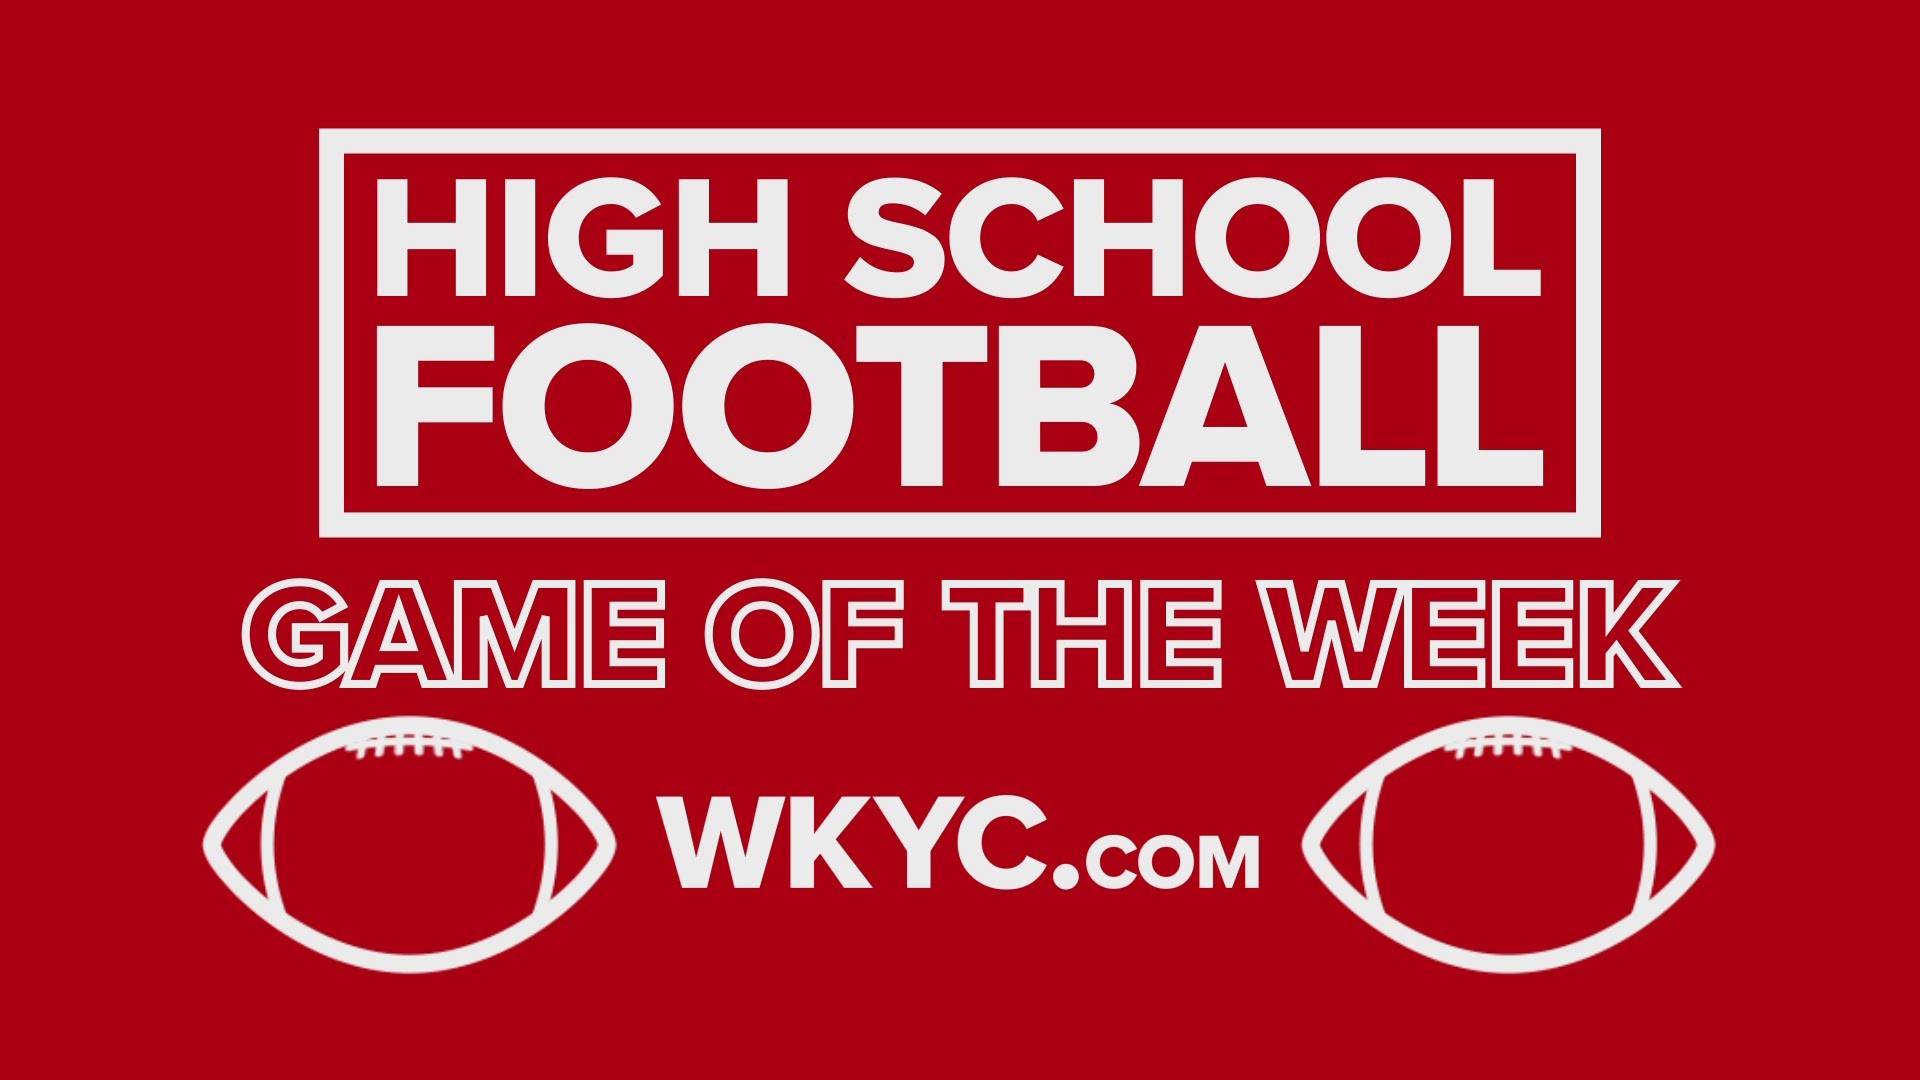 Chardon upsets Kenston 27-24 as time expires in WKYC.com's Game of the Week